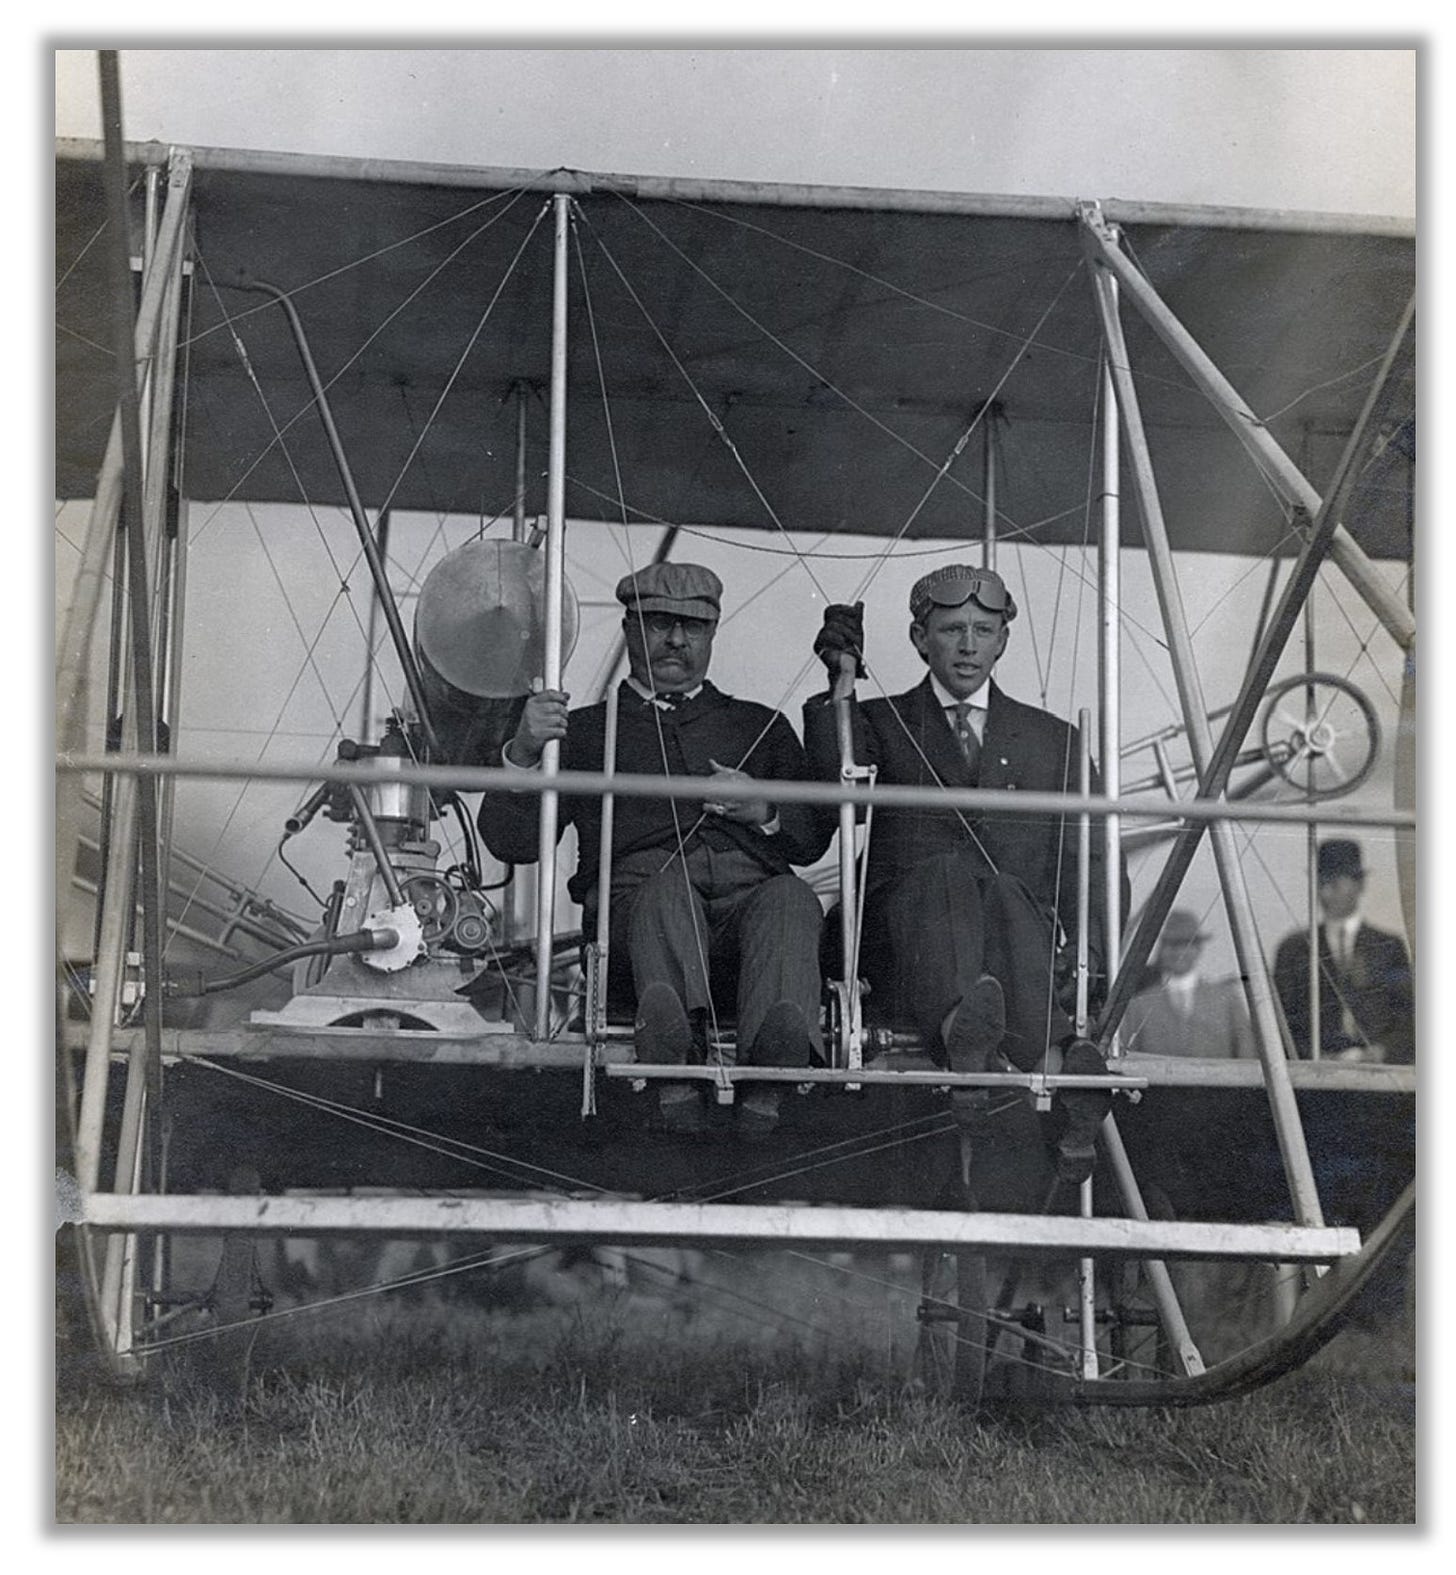 Roosevelt and Hoxsey are pictured aboard the plane, preparing to depart.